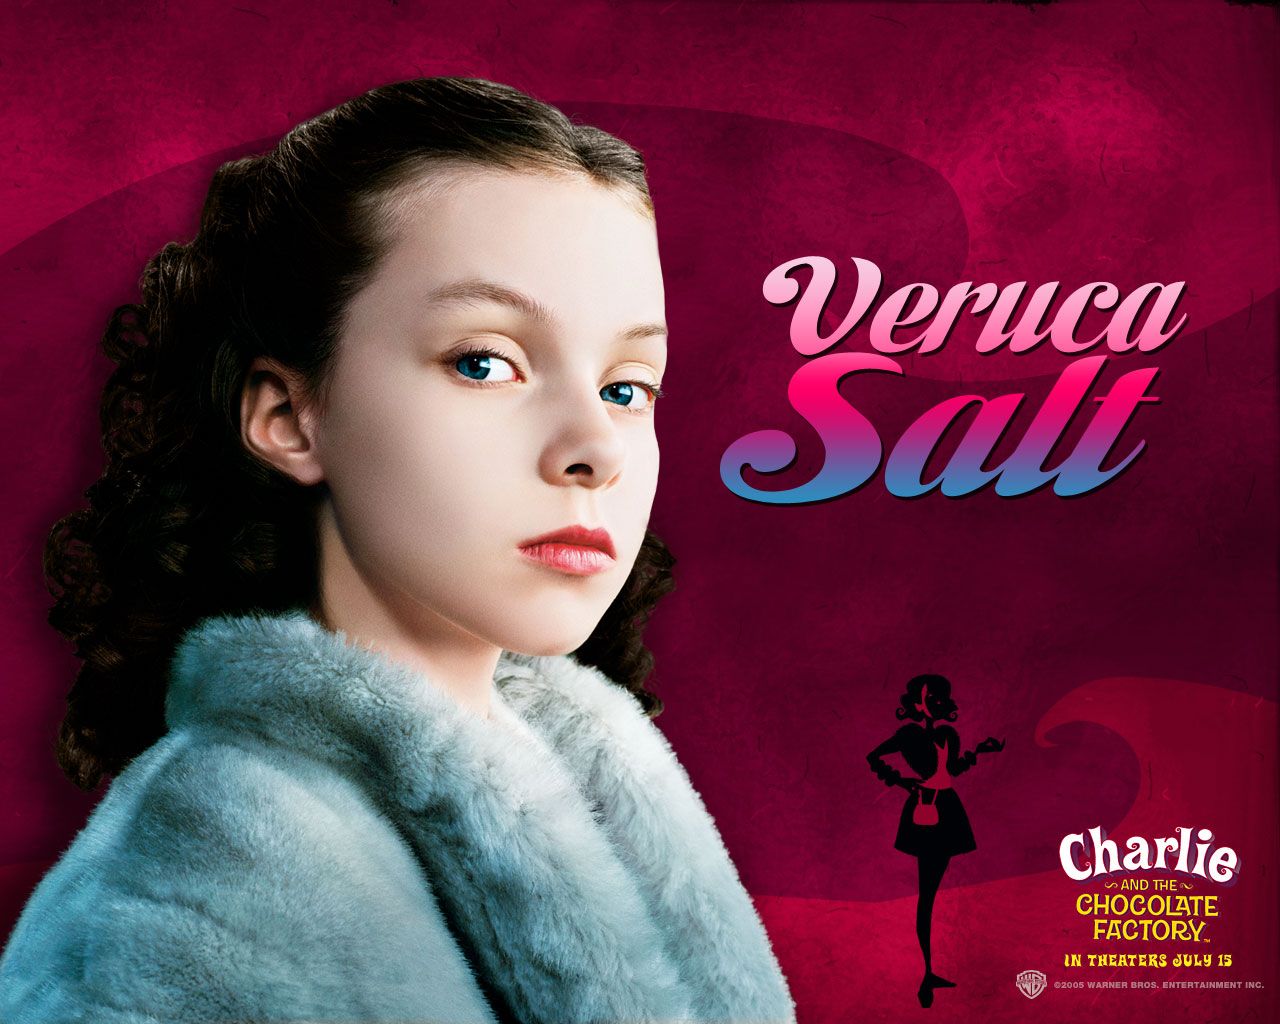 Charlie and the Chocolate Factory Wallpaper: Veruca Salt. Chocolate factory, Charlie chocolate factory, Veruca salt